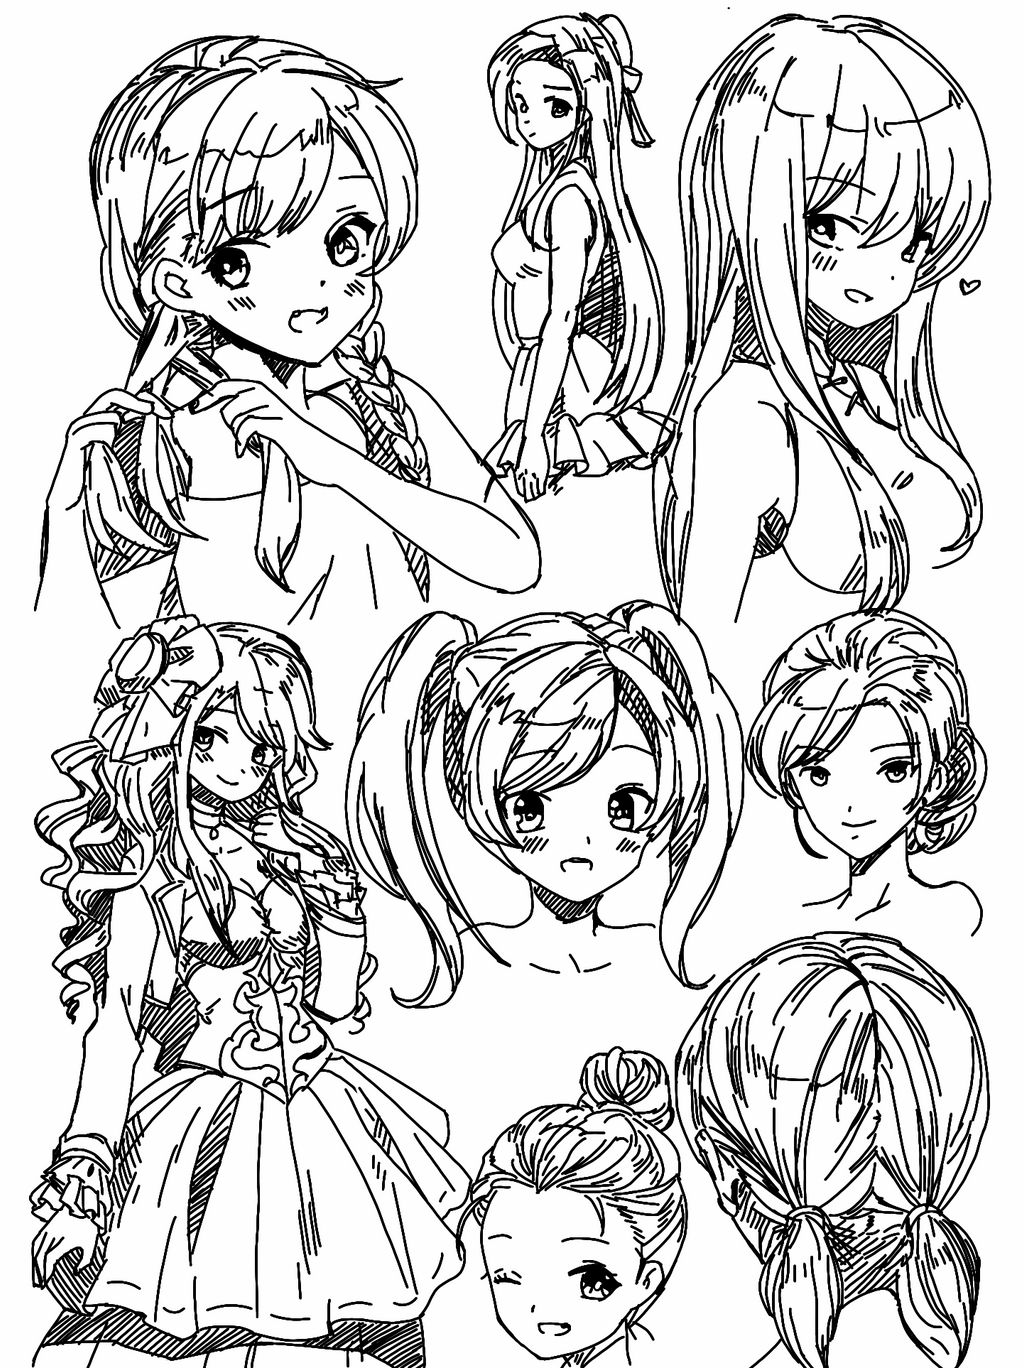 Anime Girl Hair Sketchs Pose Study References By Wyldcam On